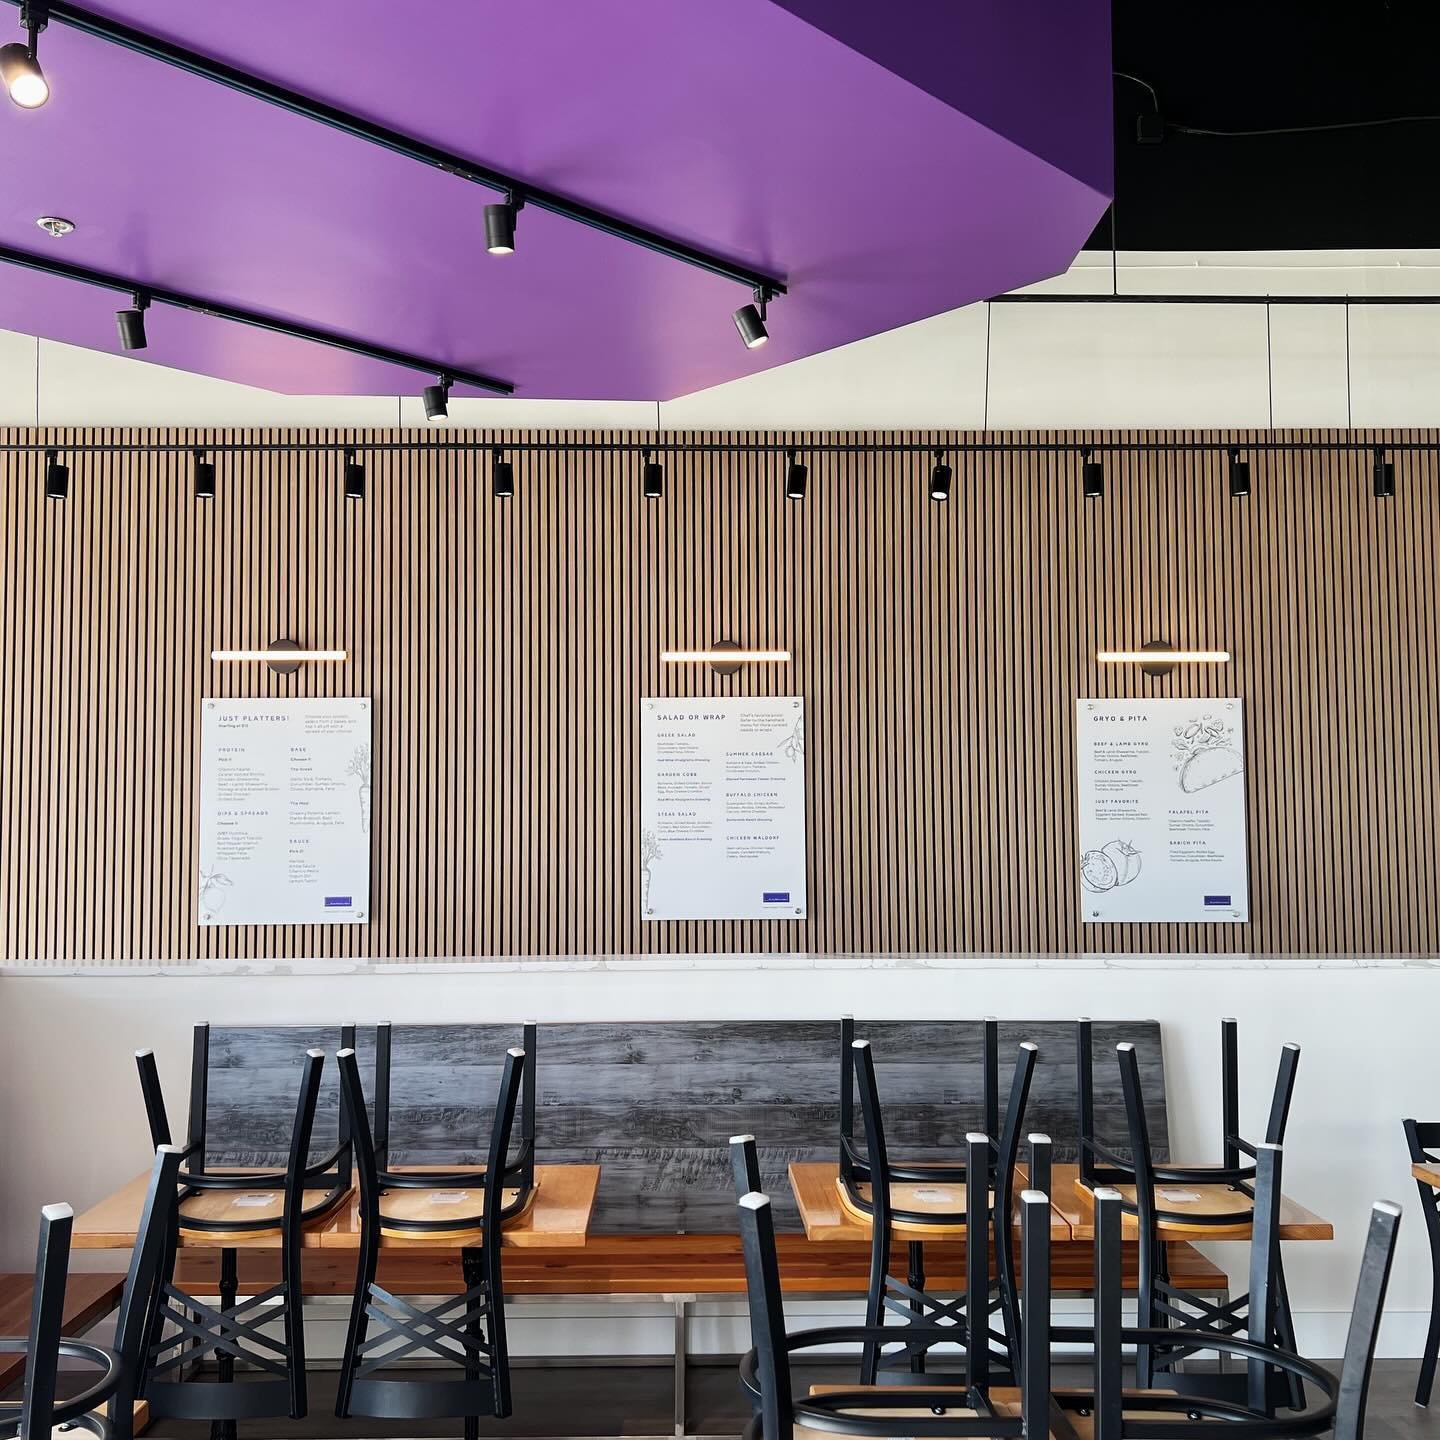 This years projects have been so good to me, here&rsquo;s a restaurant project that just opened up here in Jax, @justkitchenjax - I helped with the interior design AND designed all of the menus, hand and catering menus too! It was a fun one! Please s